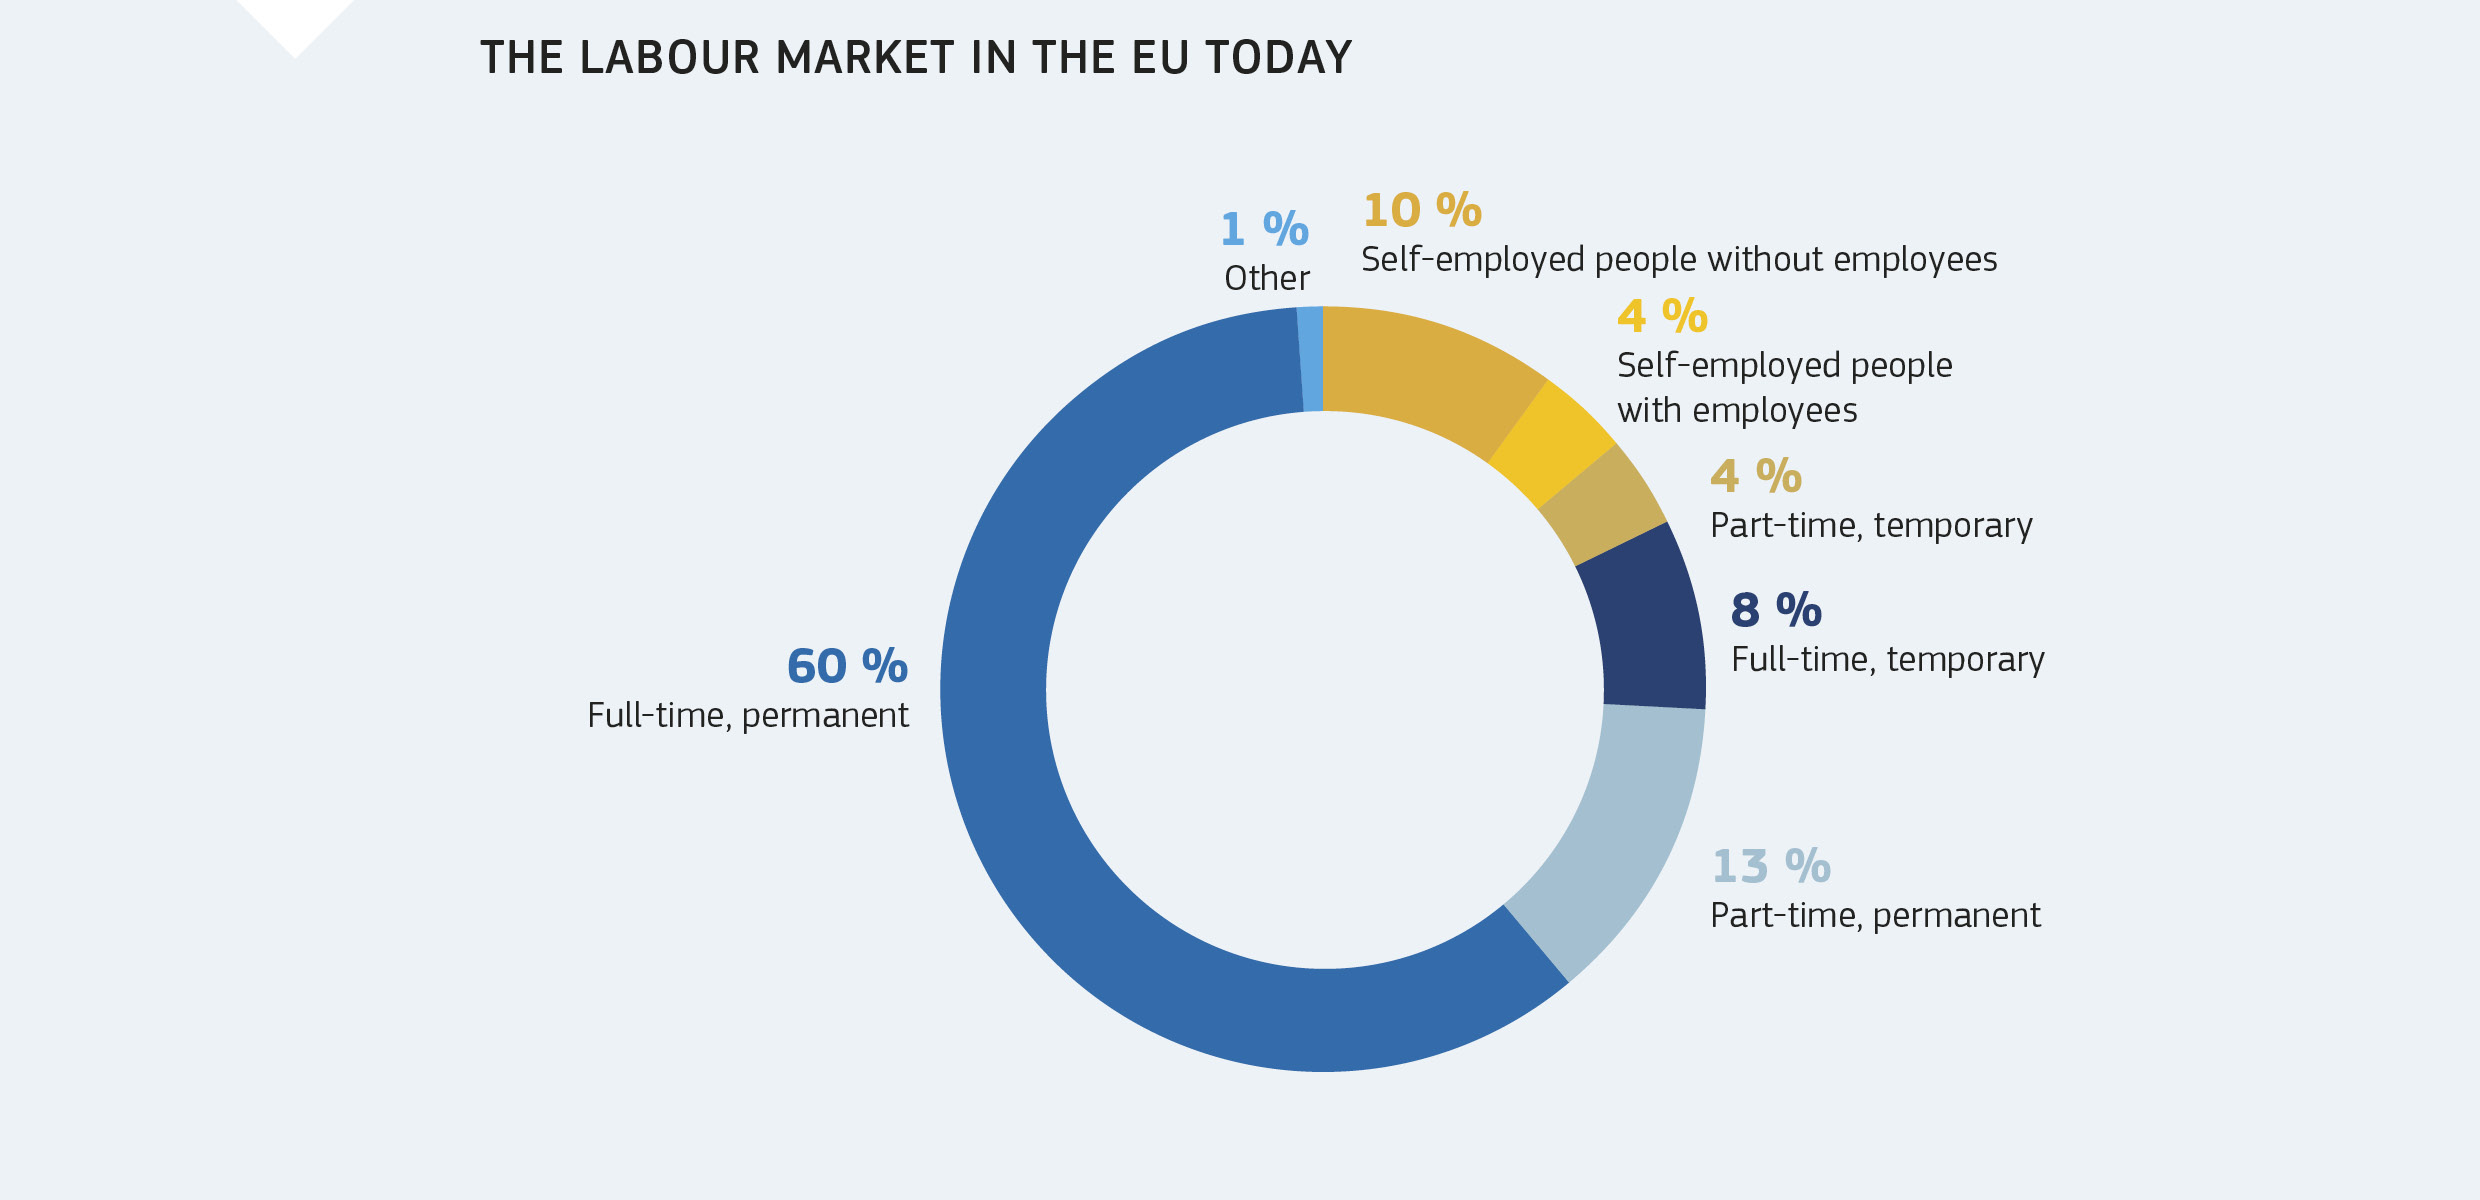 THE LABOUR MARKET IN THE EU TODAY